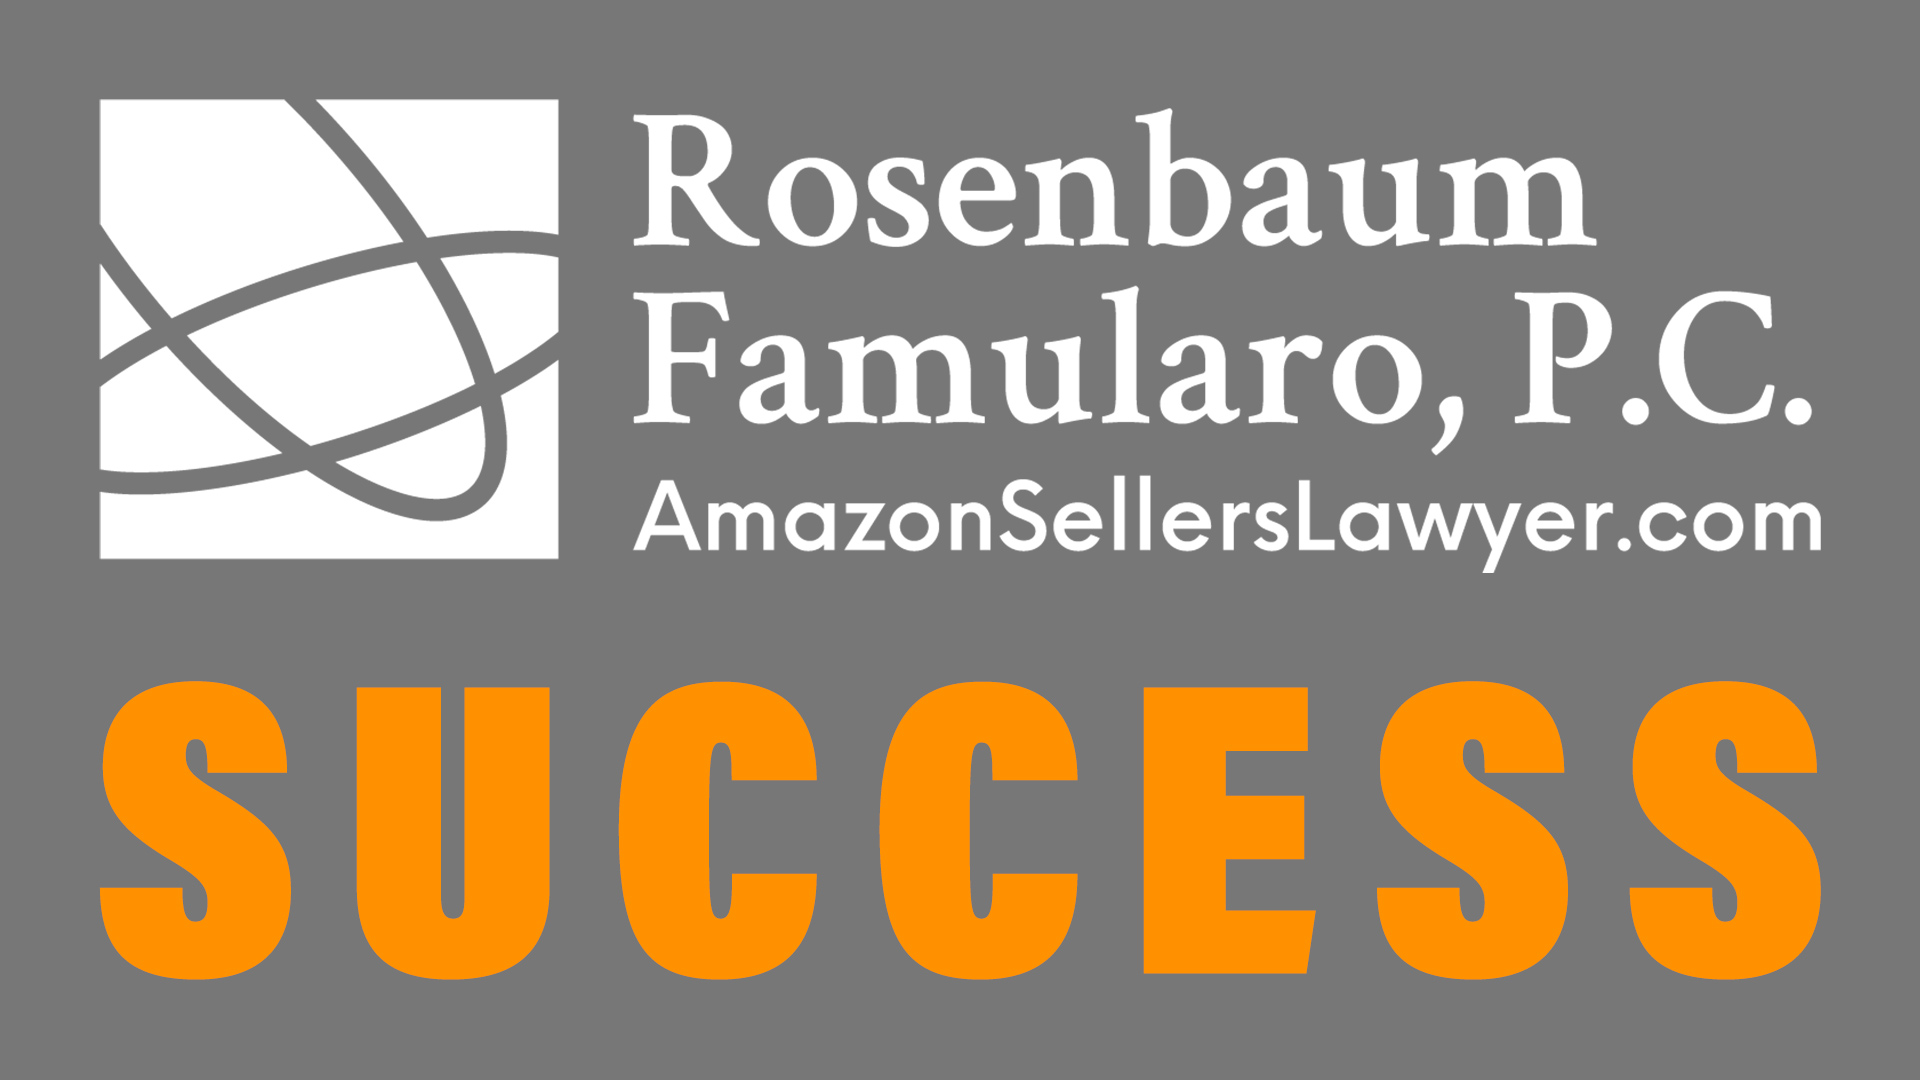 SUCCESS: Amazon seller price gouging suspension lifted with our help.